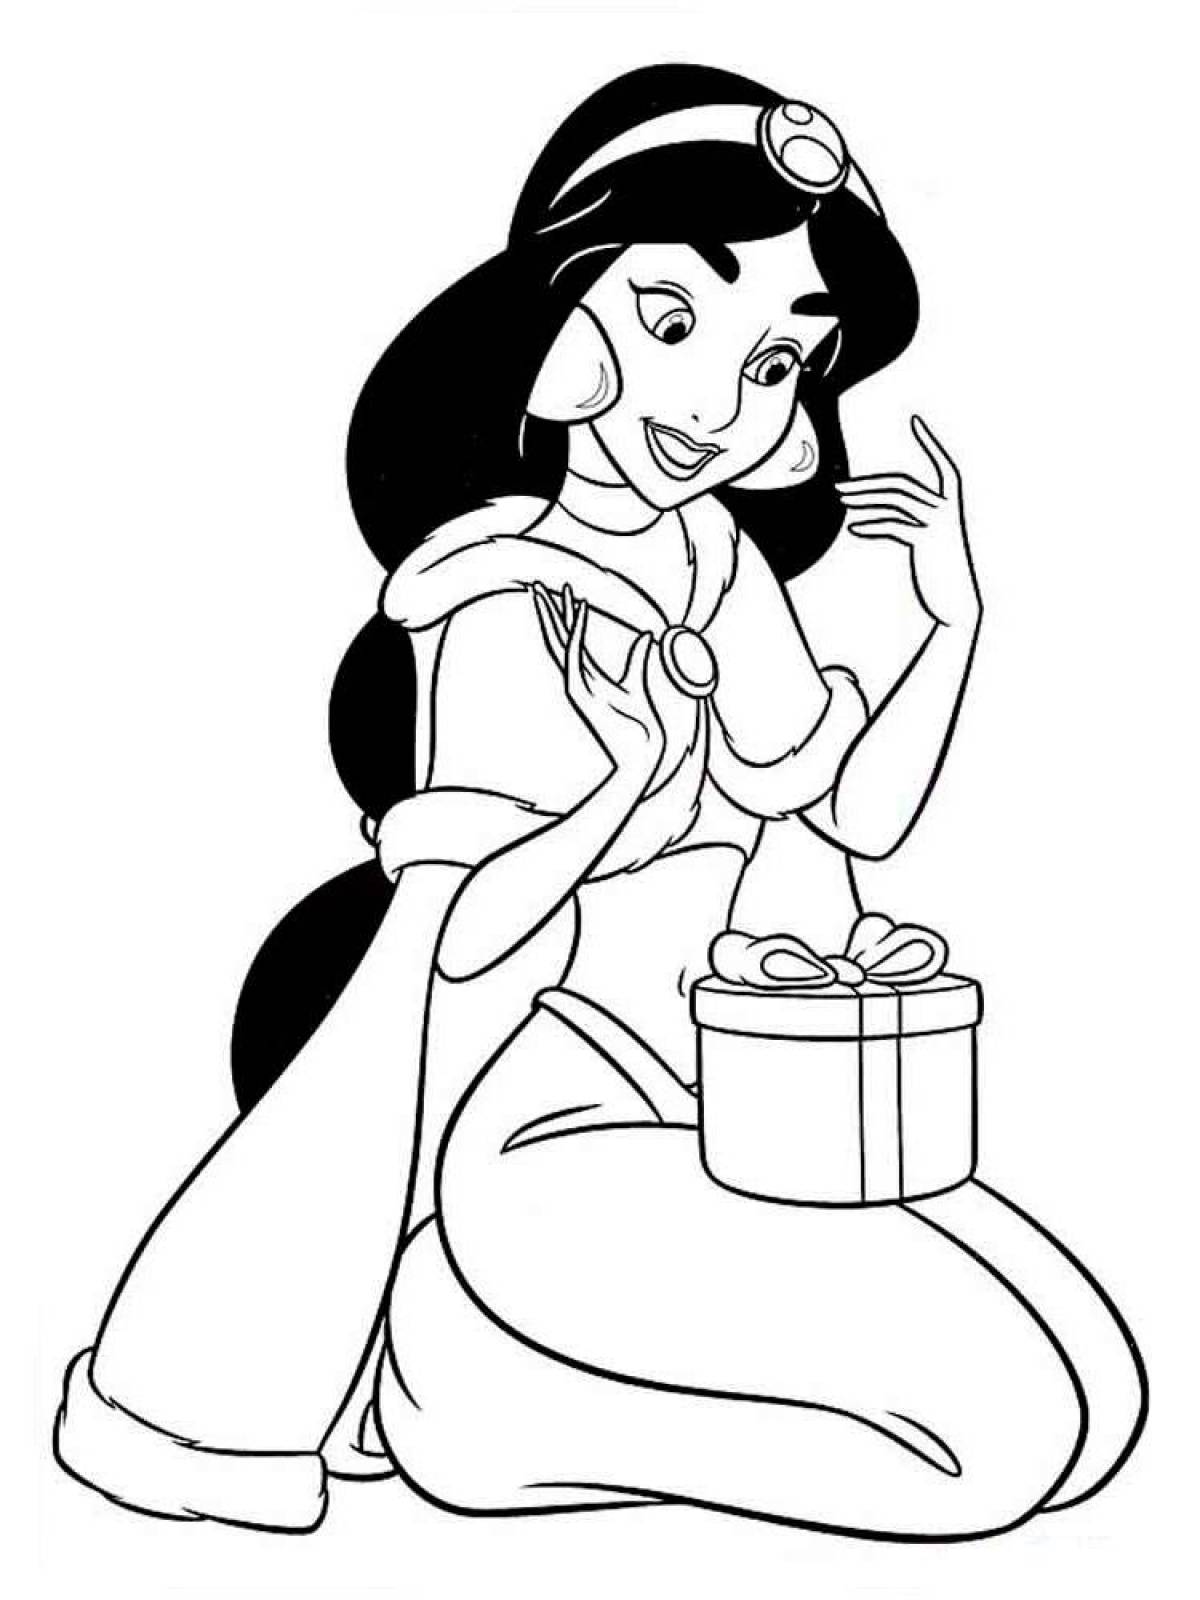 Disney princess glitter coloring pages